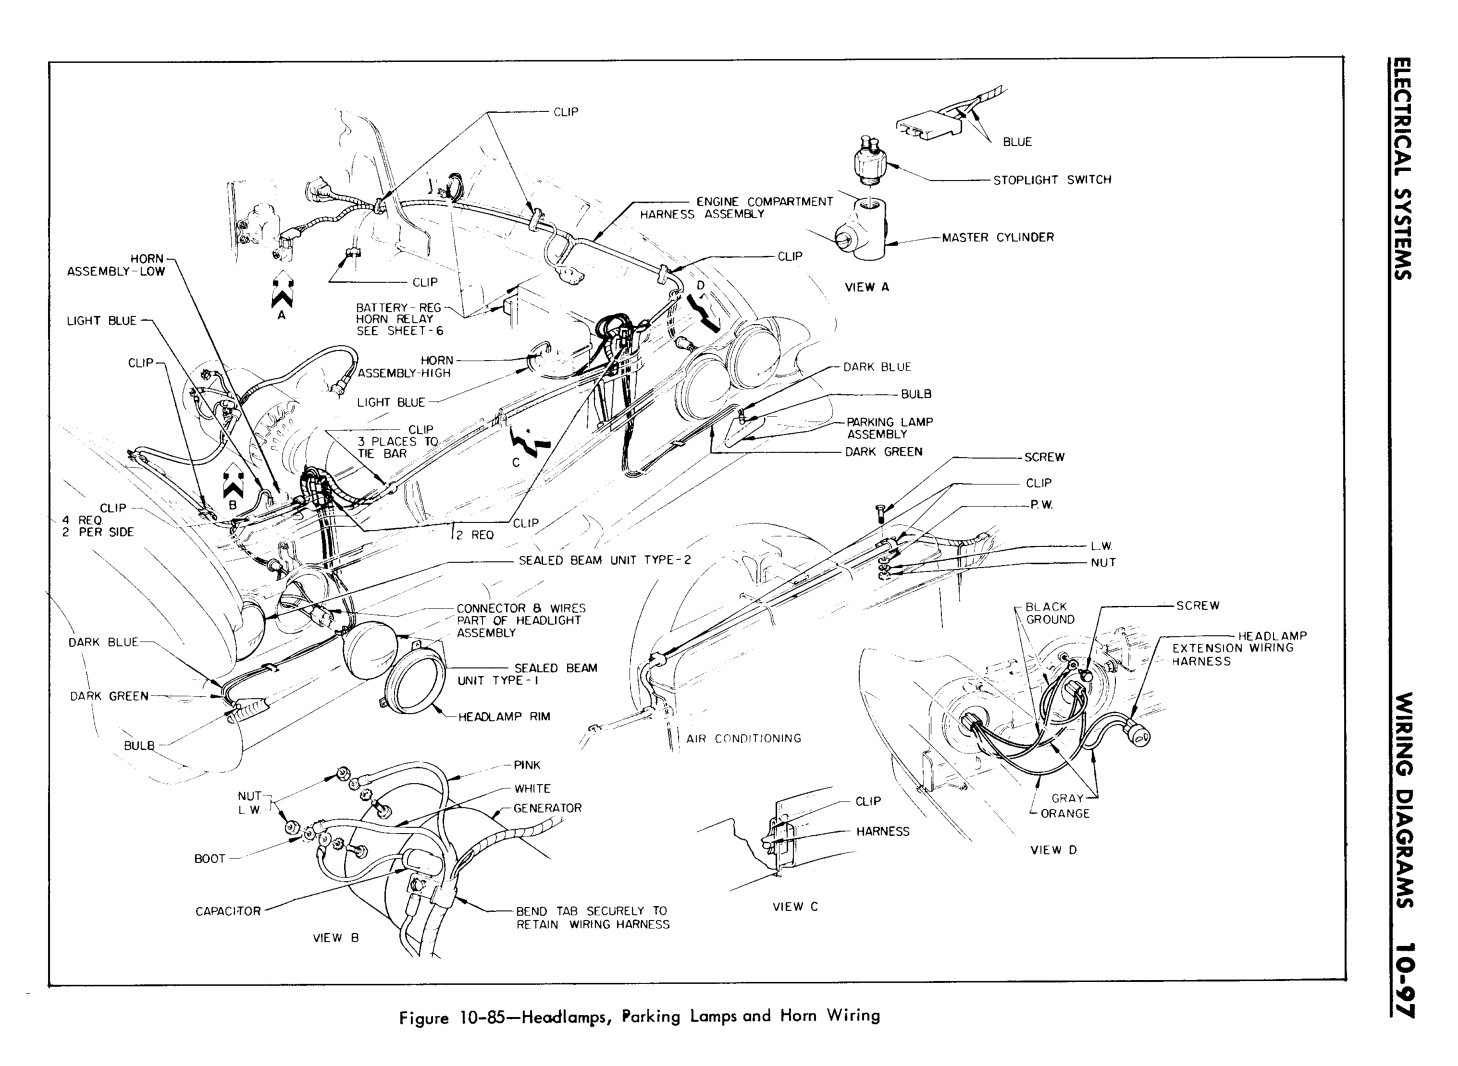 n_10 1961 Buick Shop Manual - Electrical Systems-097-097.jpg